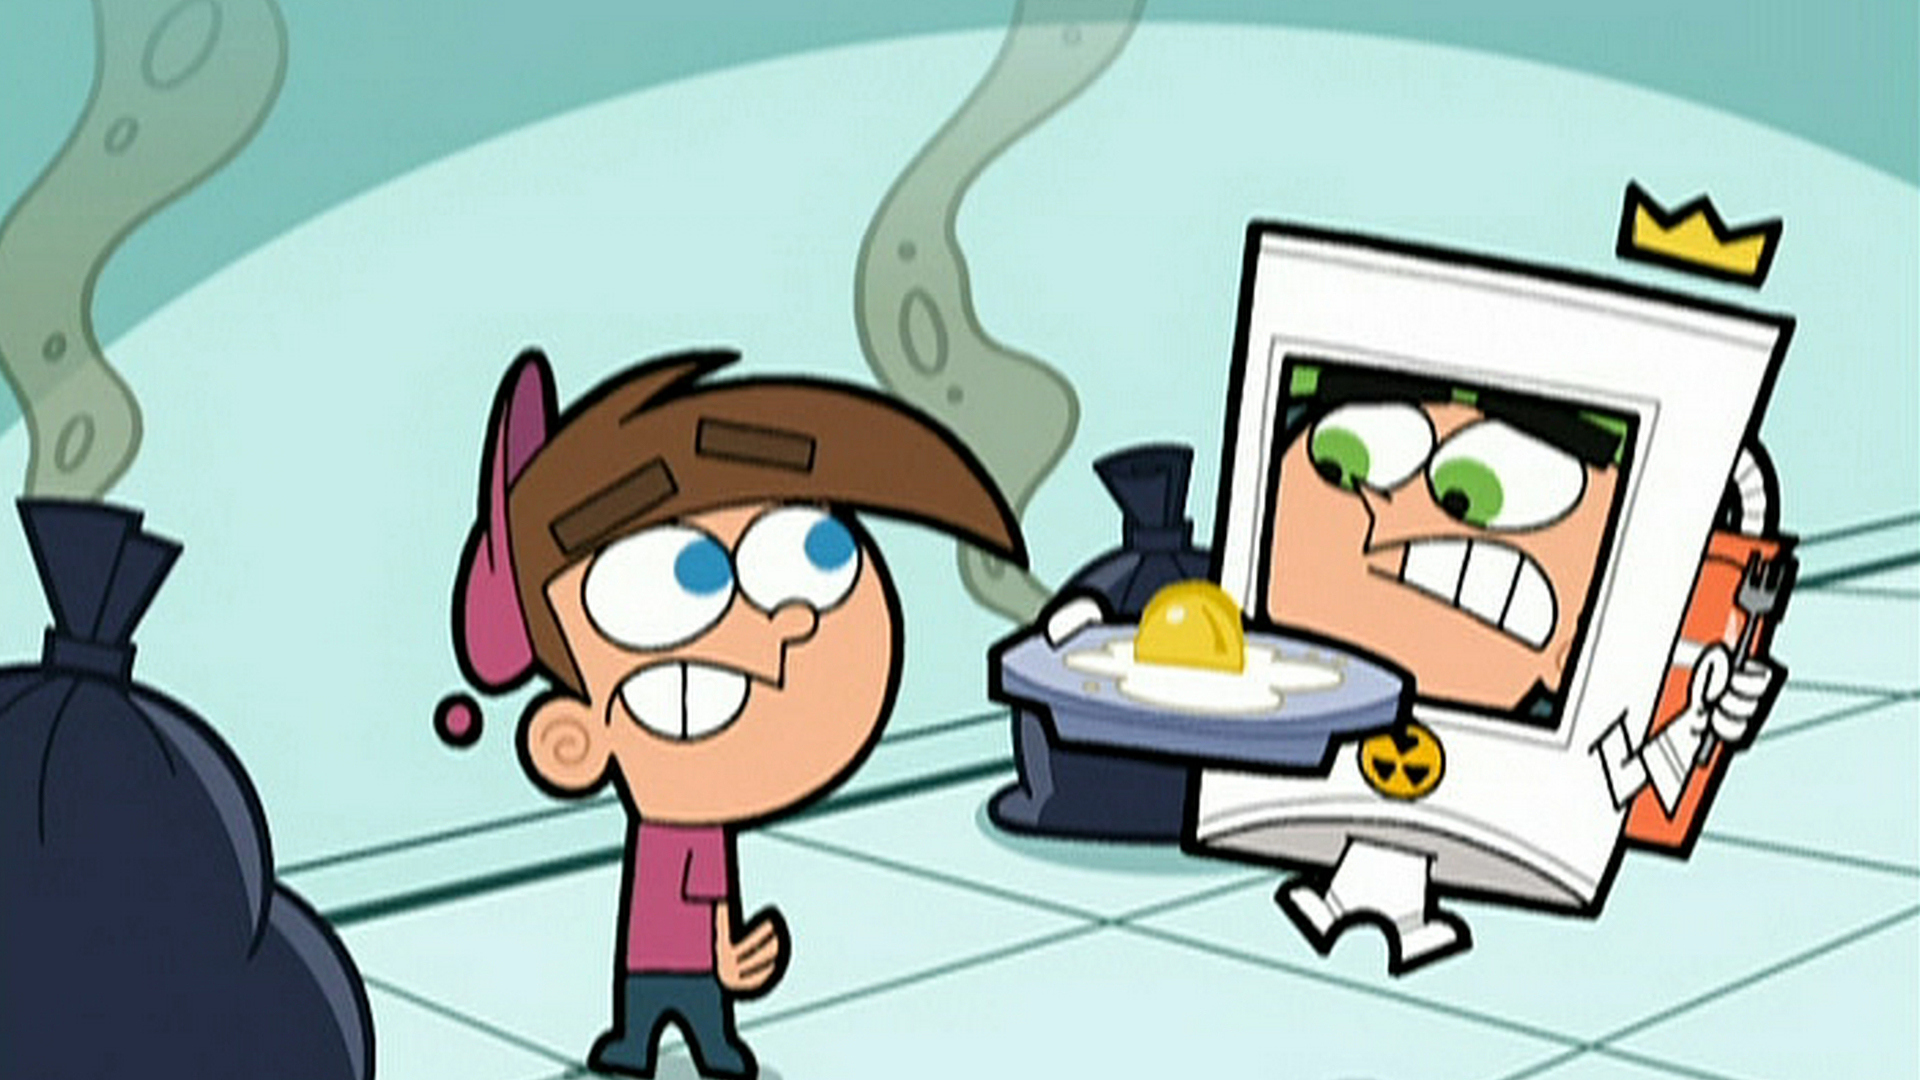 fairly odd parents series finale